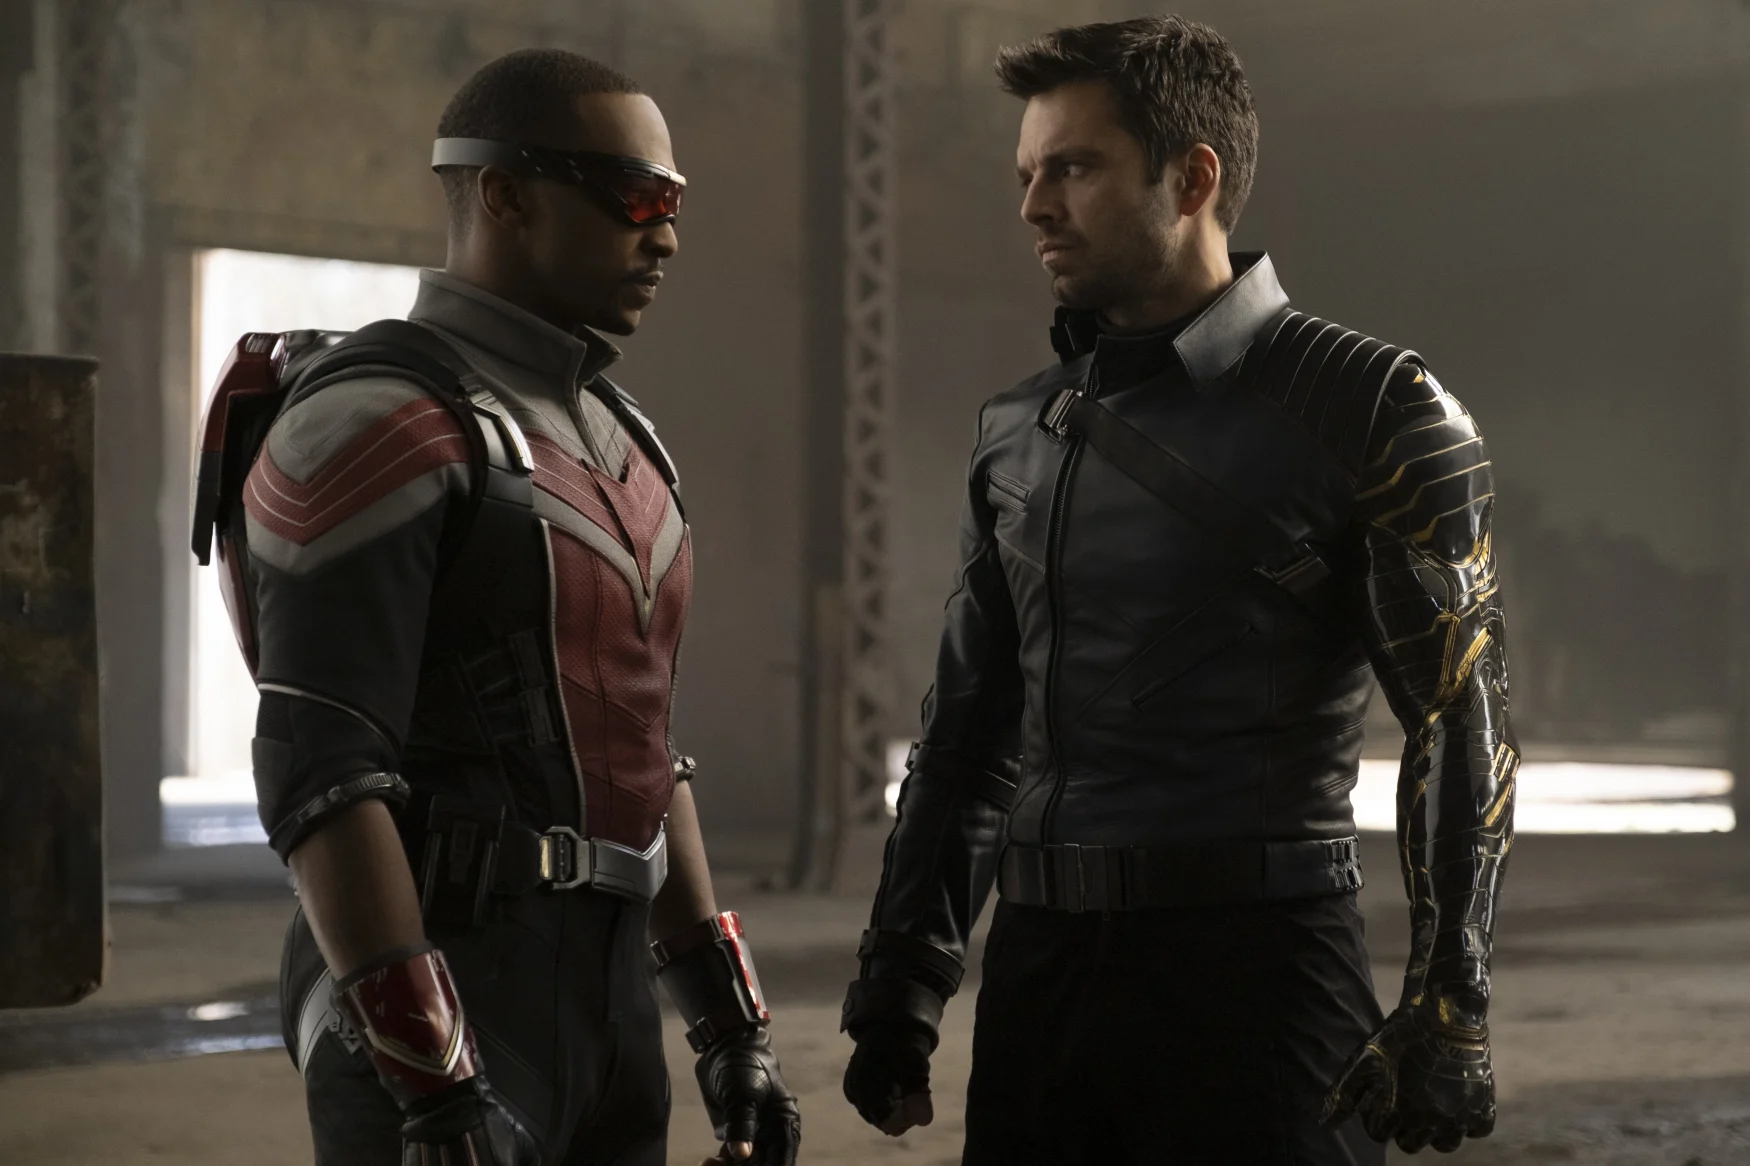 The Falcon (Sam Wilson) and the Winter Soldier (James Barnes) face each other.